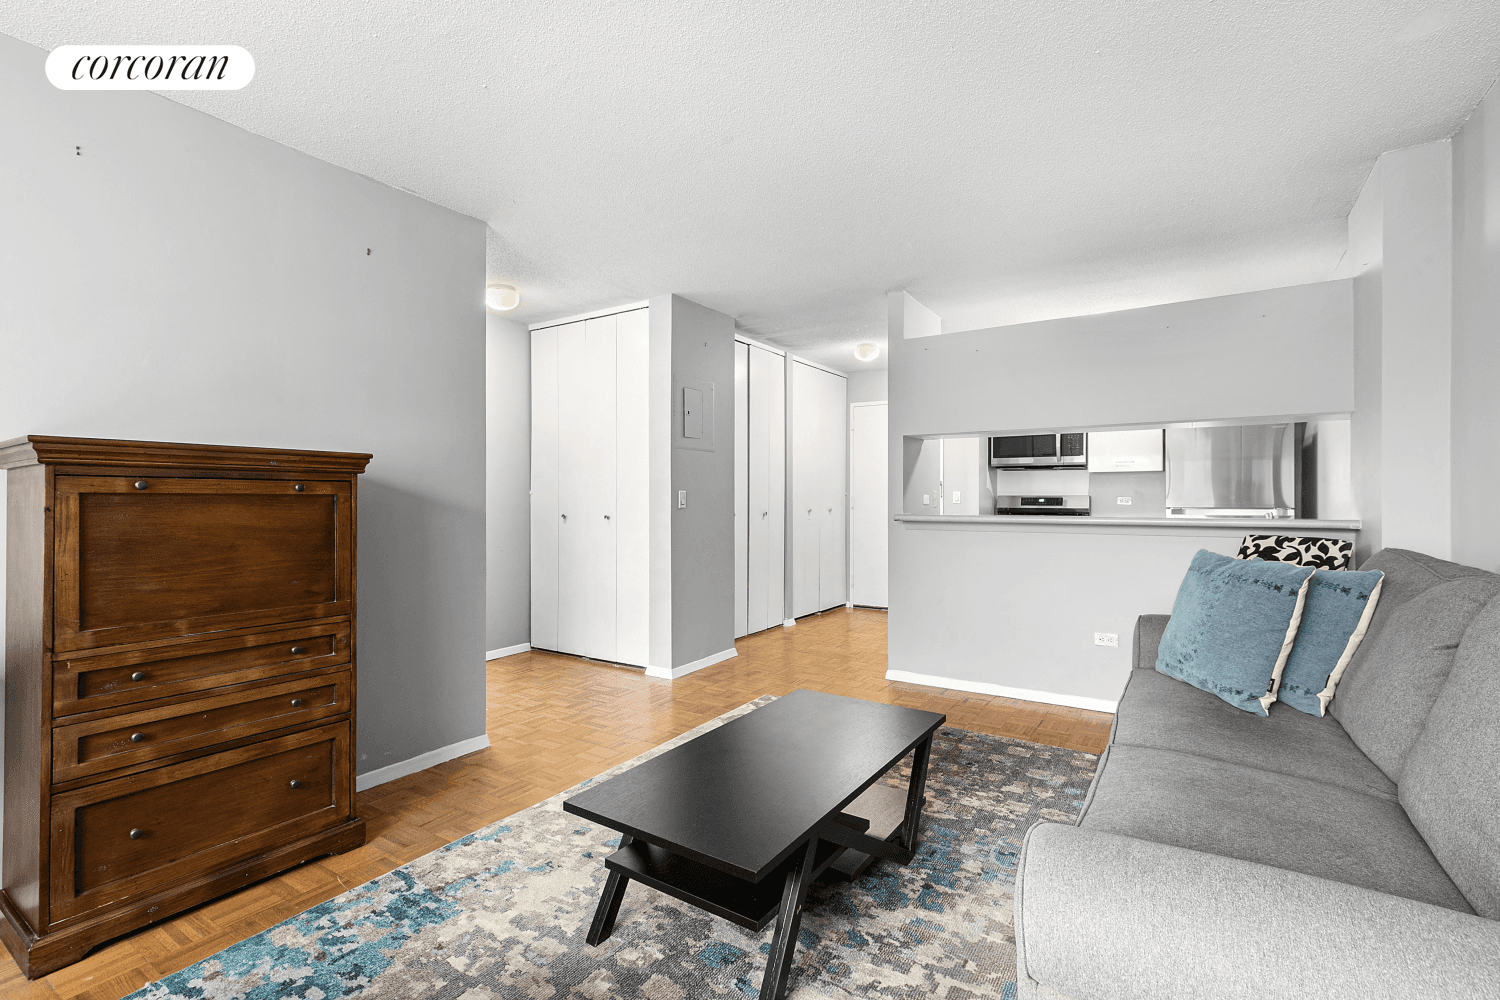 Lease Fell Through A True GemWelcome to a sunny, bright east facing one bedroom condo with a tree lined street view looking over Battery Place.